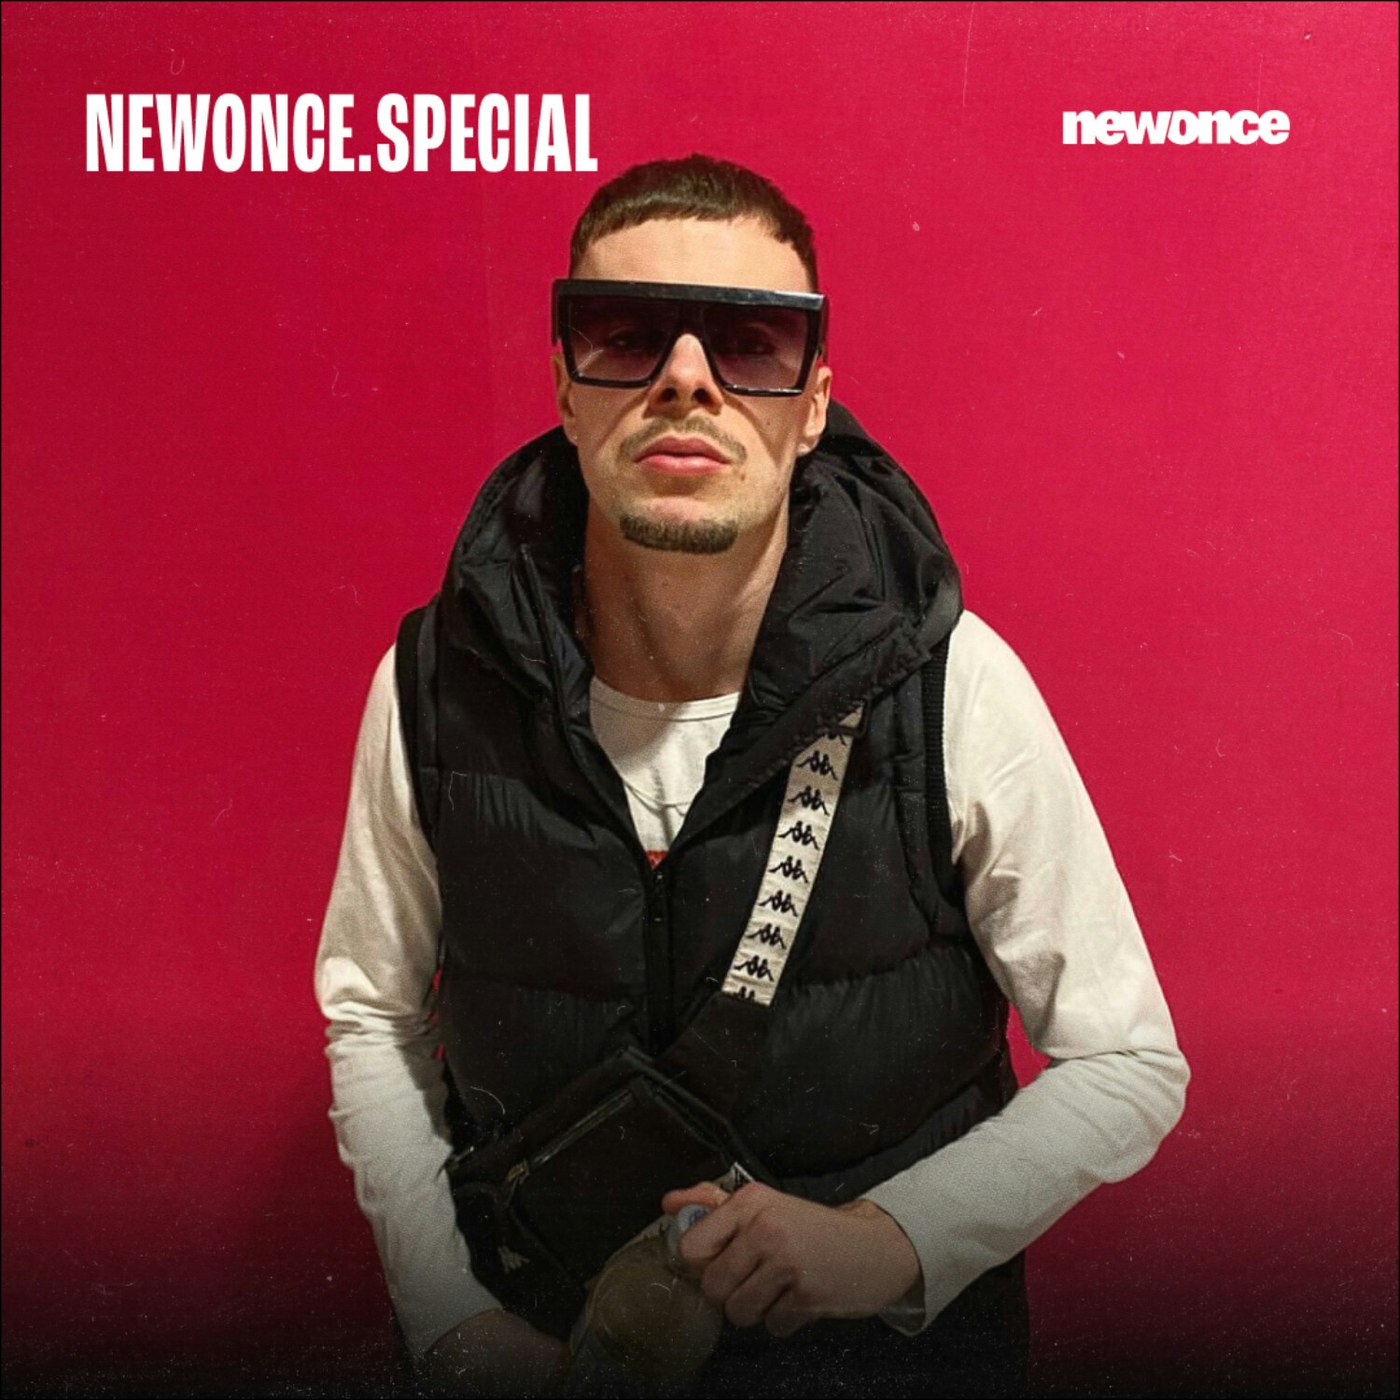 newonce specials